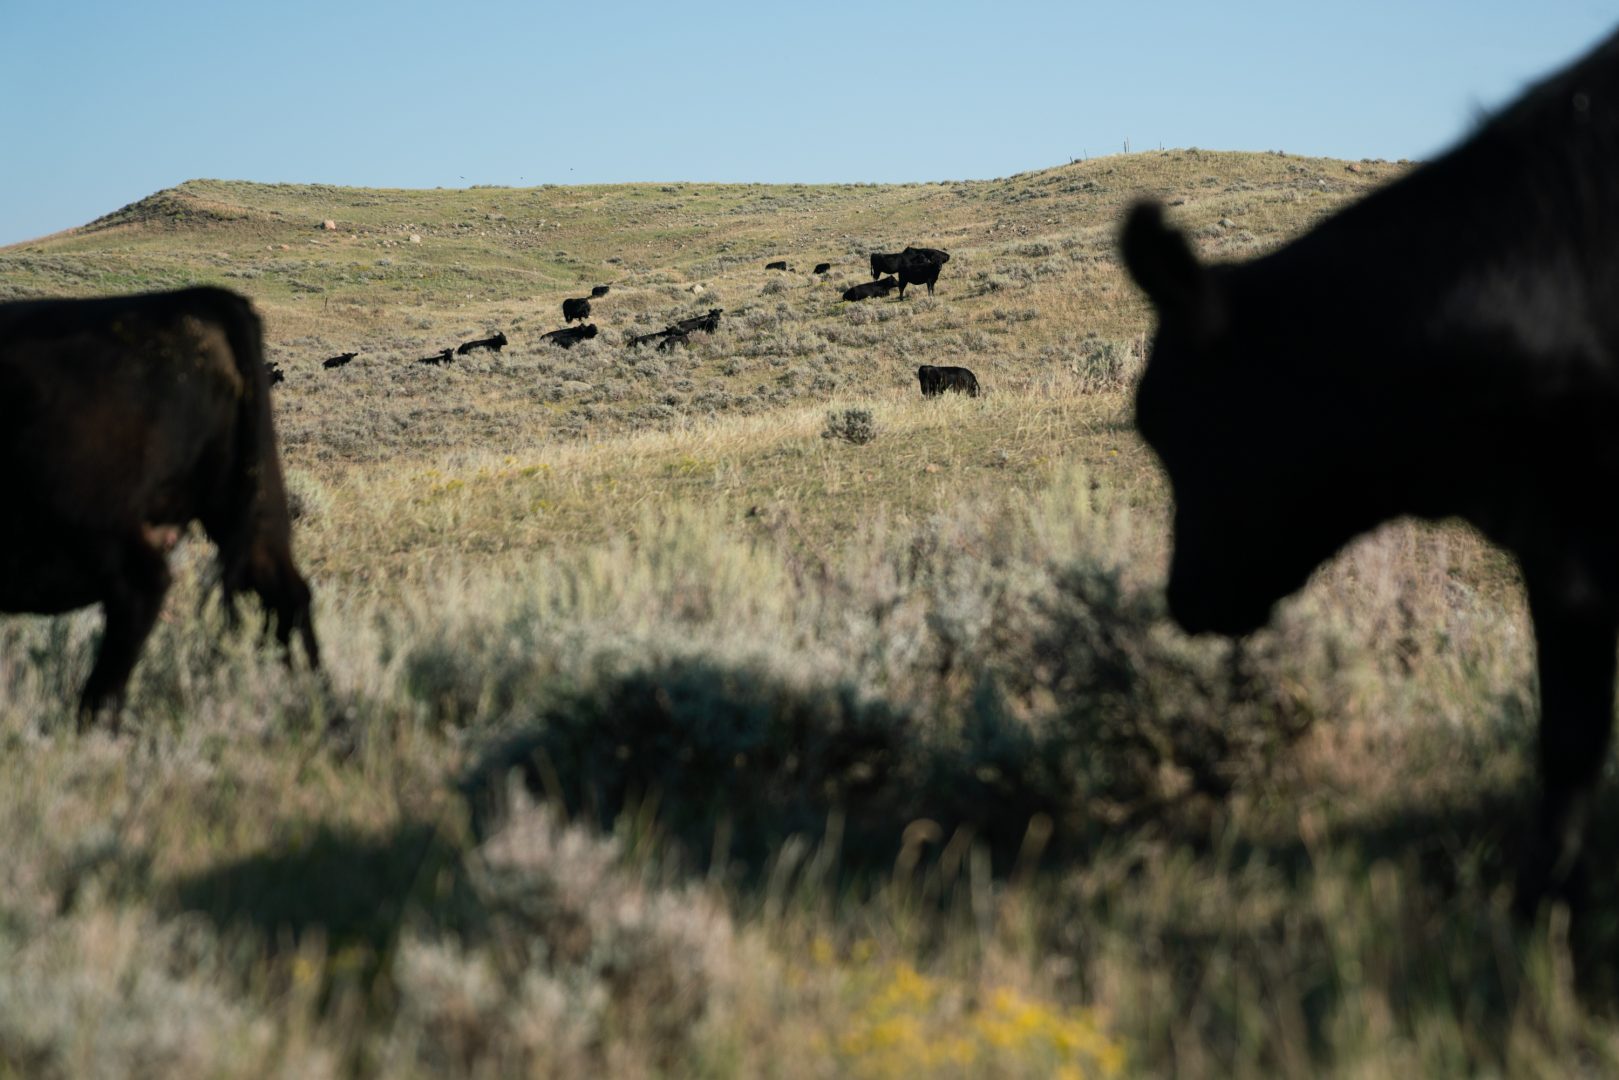 Conni and Craig French own C Lazy J Ranch in northeastern Montana. Conni is concerned about the American Prairie Reserve buying up ranchland to turn it into a wildlife sanctuary.